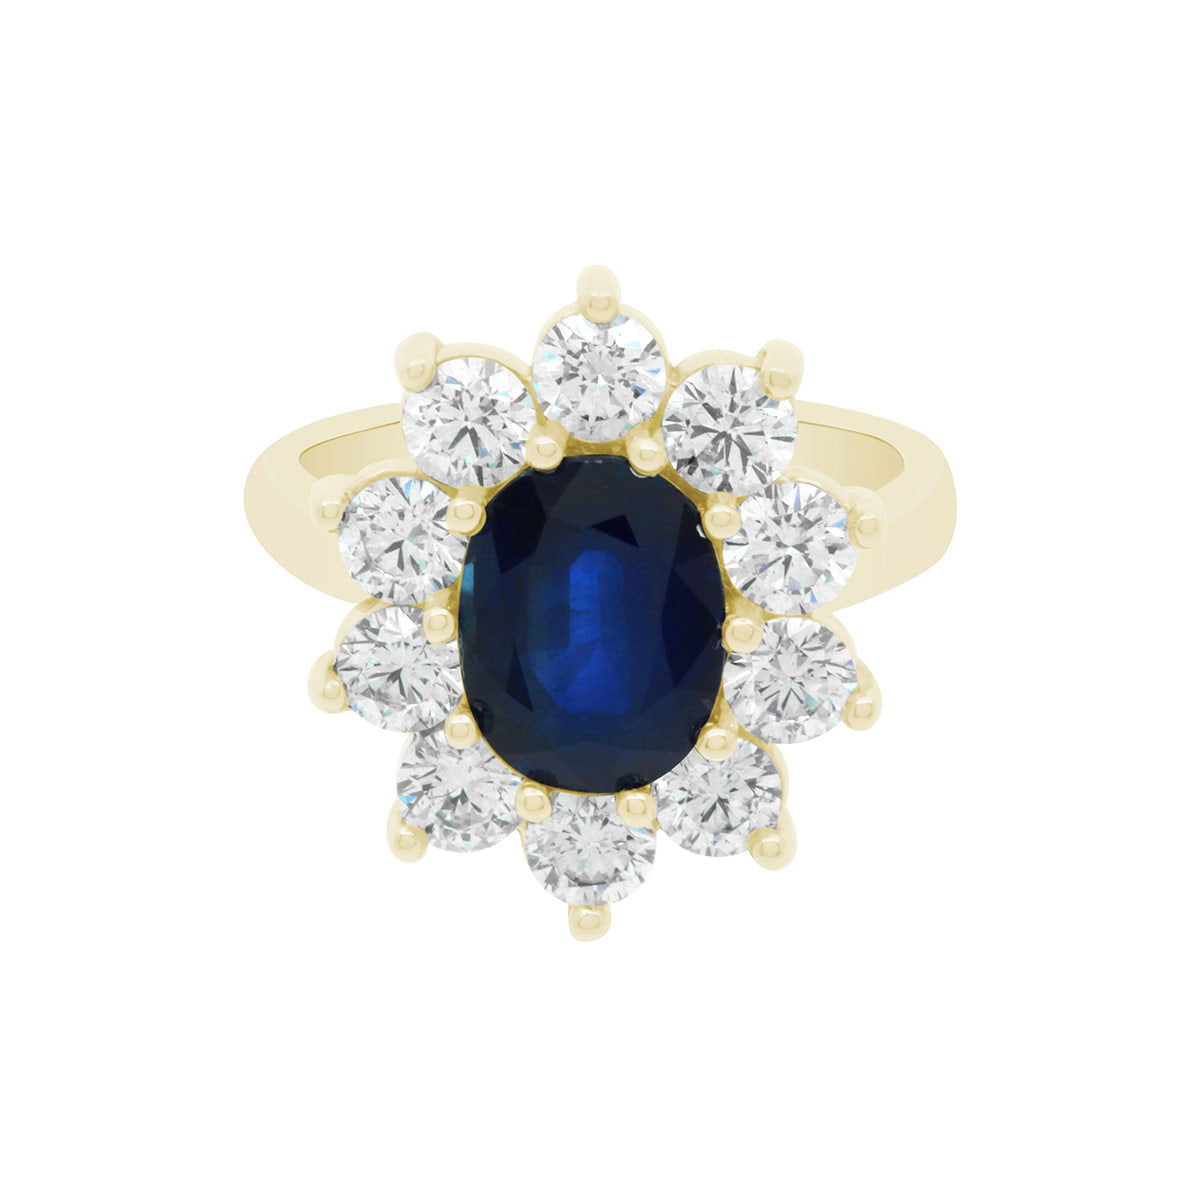 Sapphire Engagement Ring in yellow gold with a cluster of sparkling white diamonds